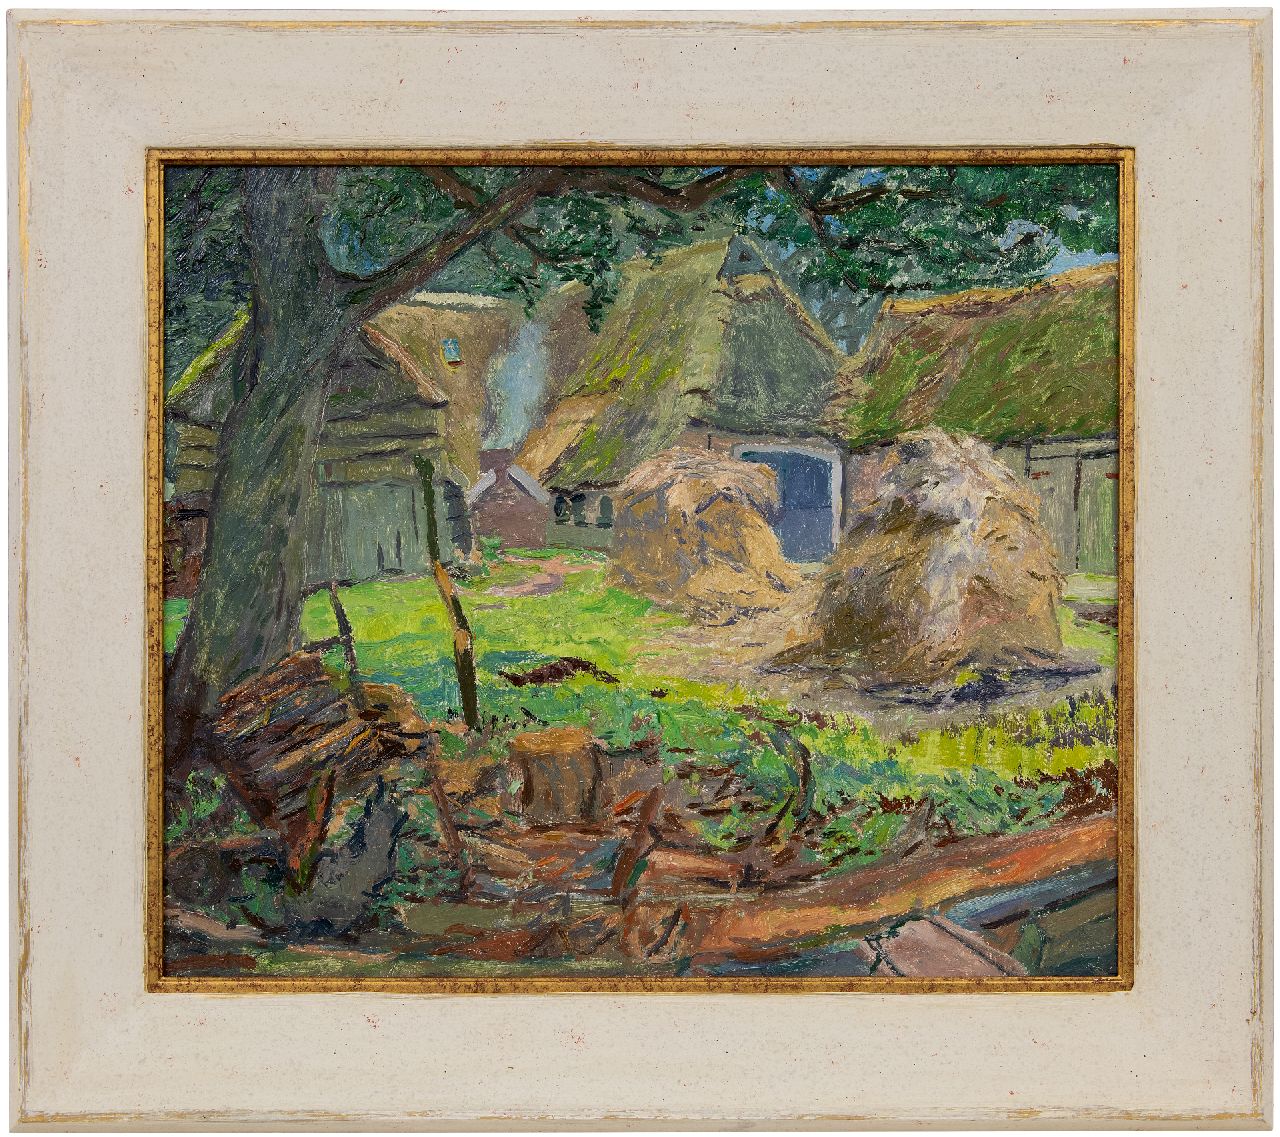 Vries J. de | Jannes de Vries, Farmyard with hay shards, oil on canvas 60.4 x 70.8 cm, signed on the reverse with monogram